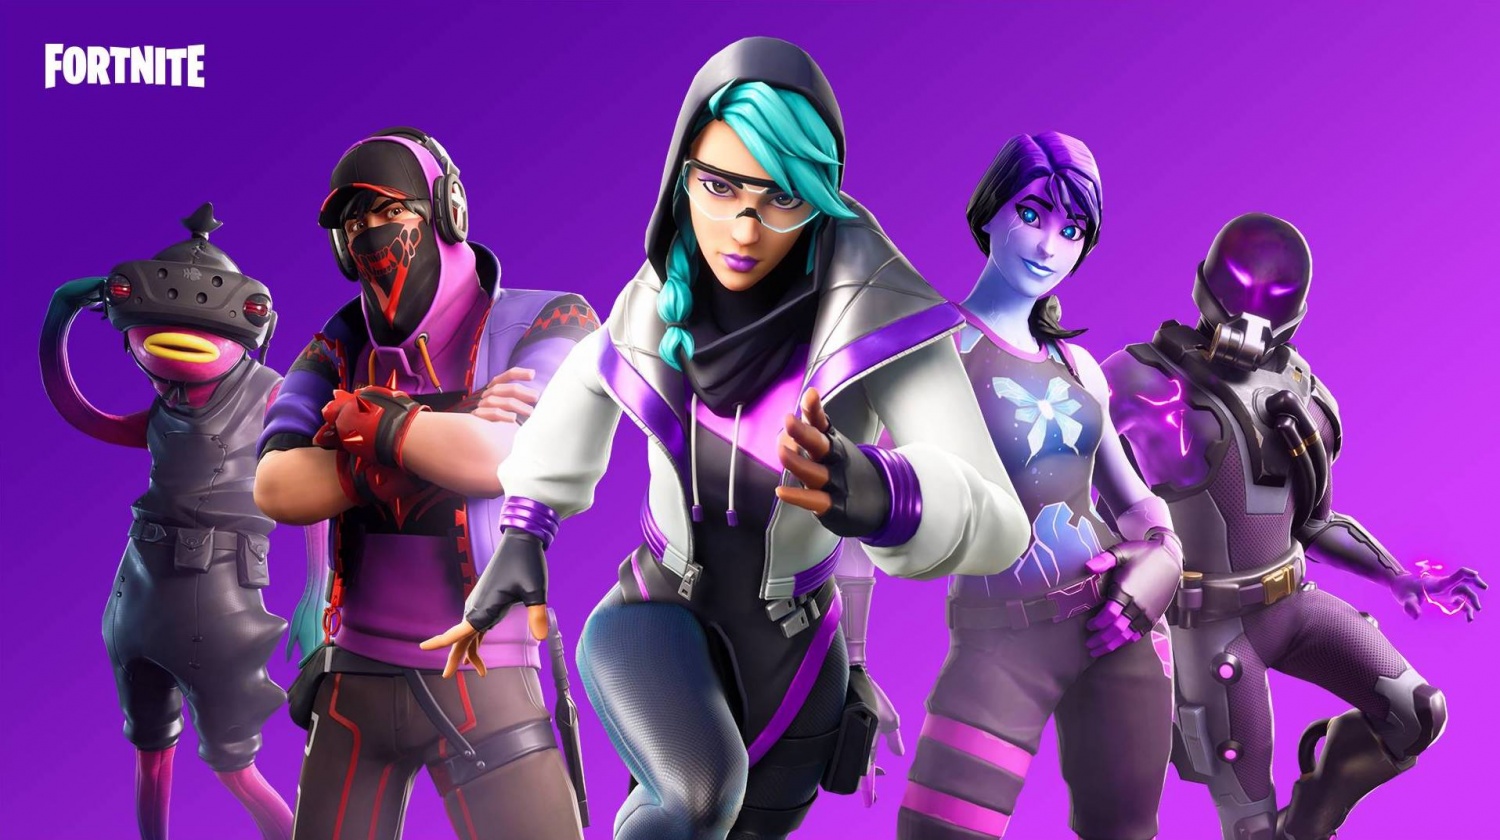 Epic Games Update: Fortnite, Infinity Blade, and Others ... - 1500 x 840 jpeg 337kB